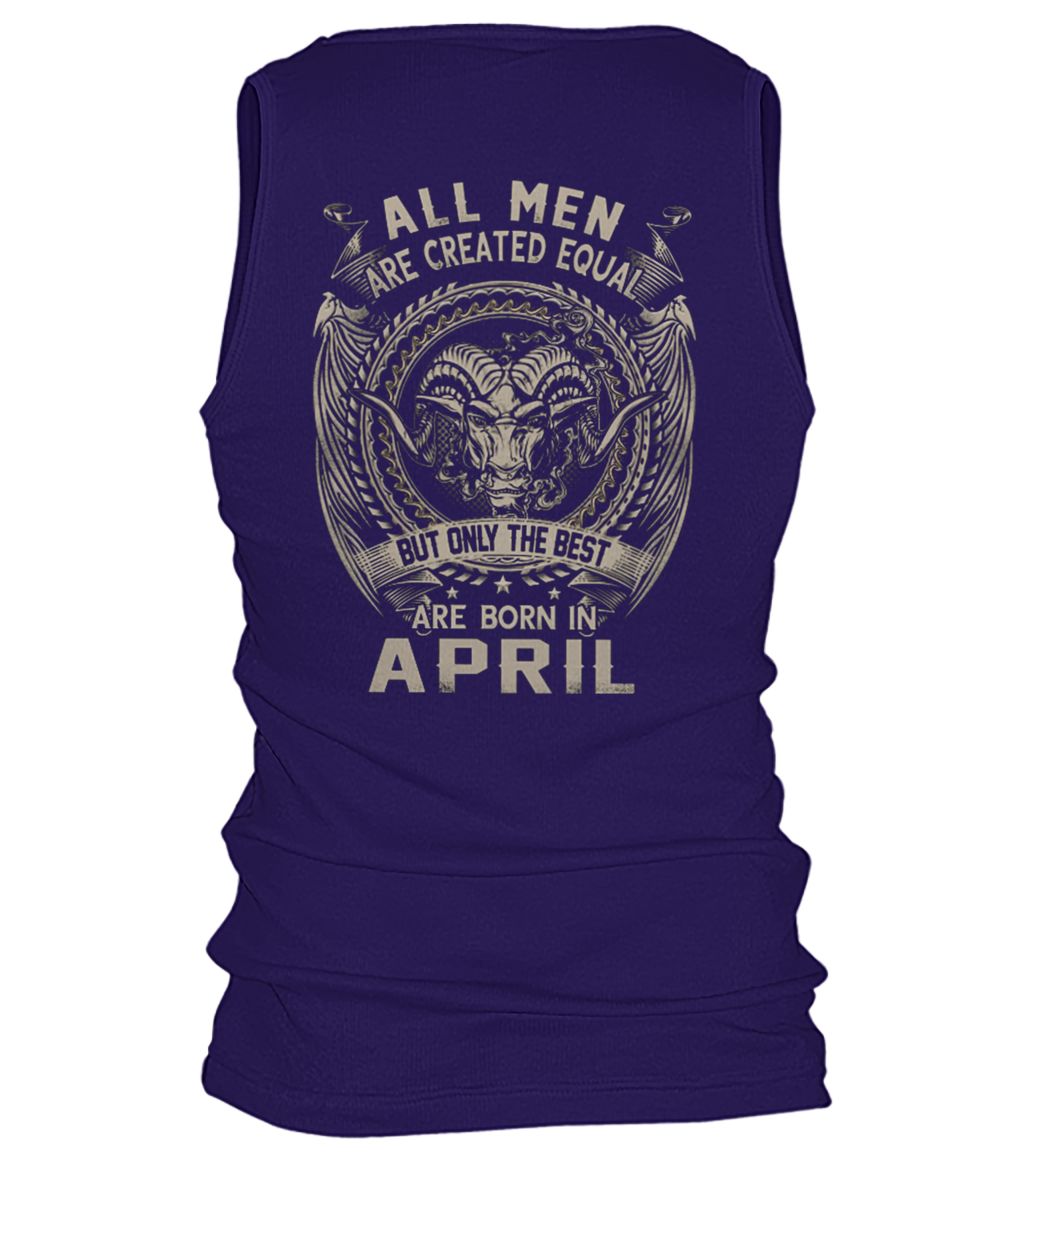 All men created equal but the best are born in april men's tank top